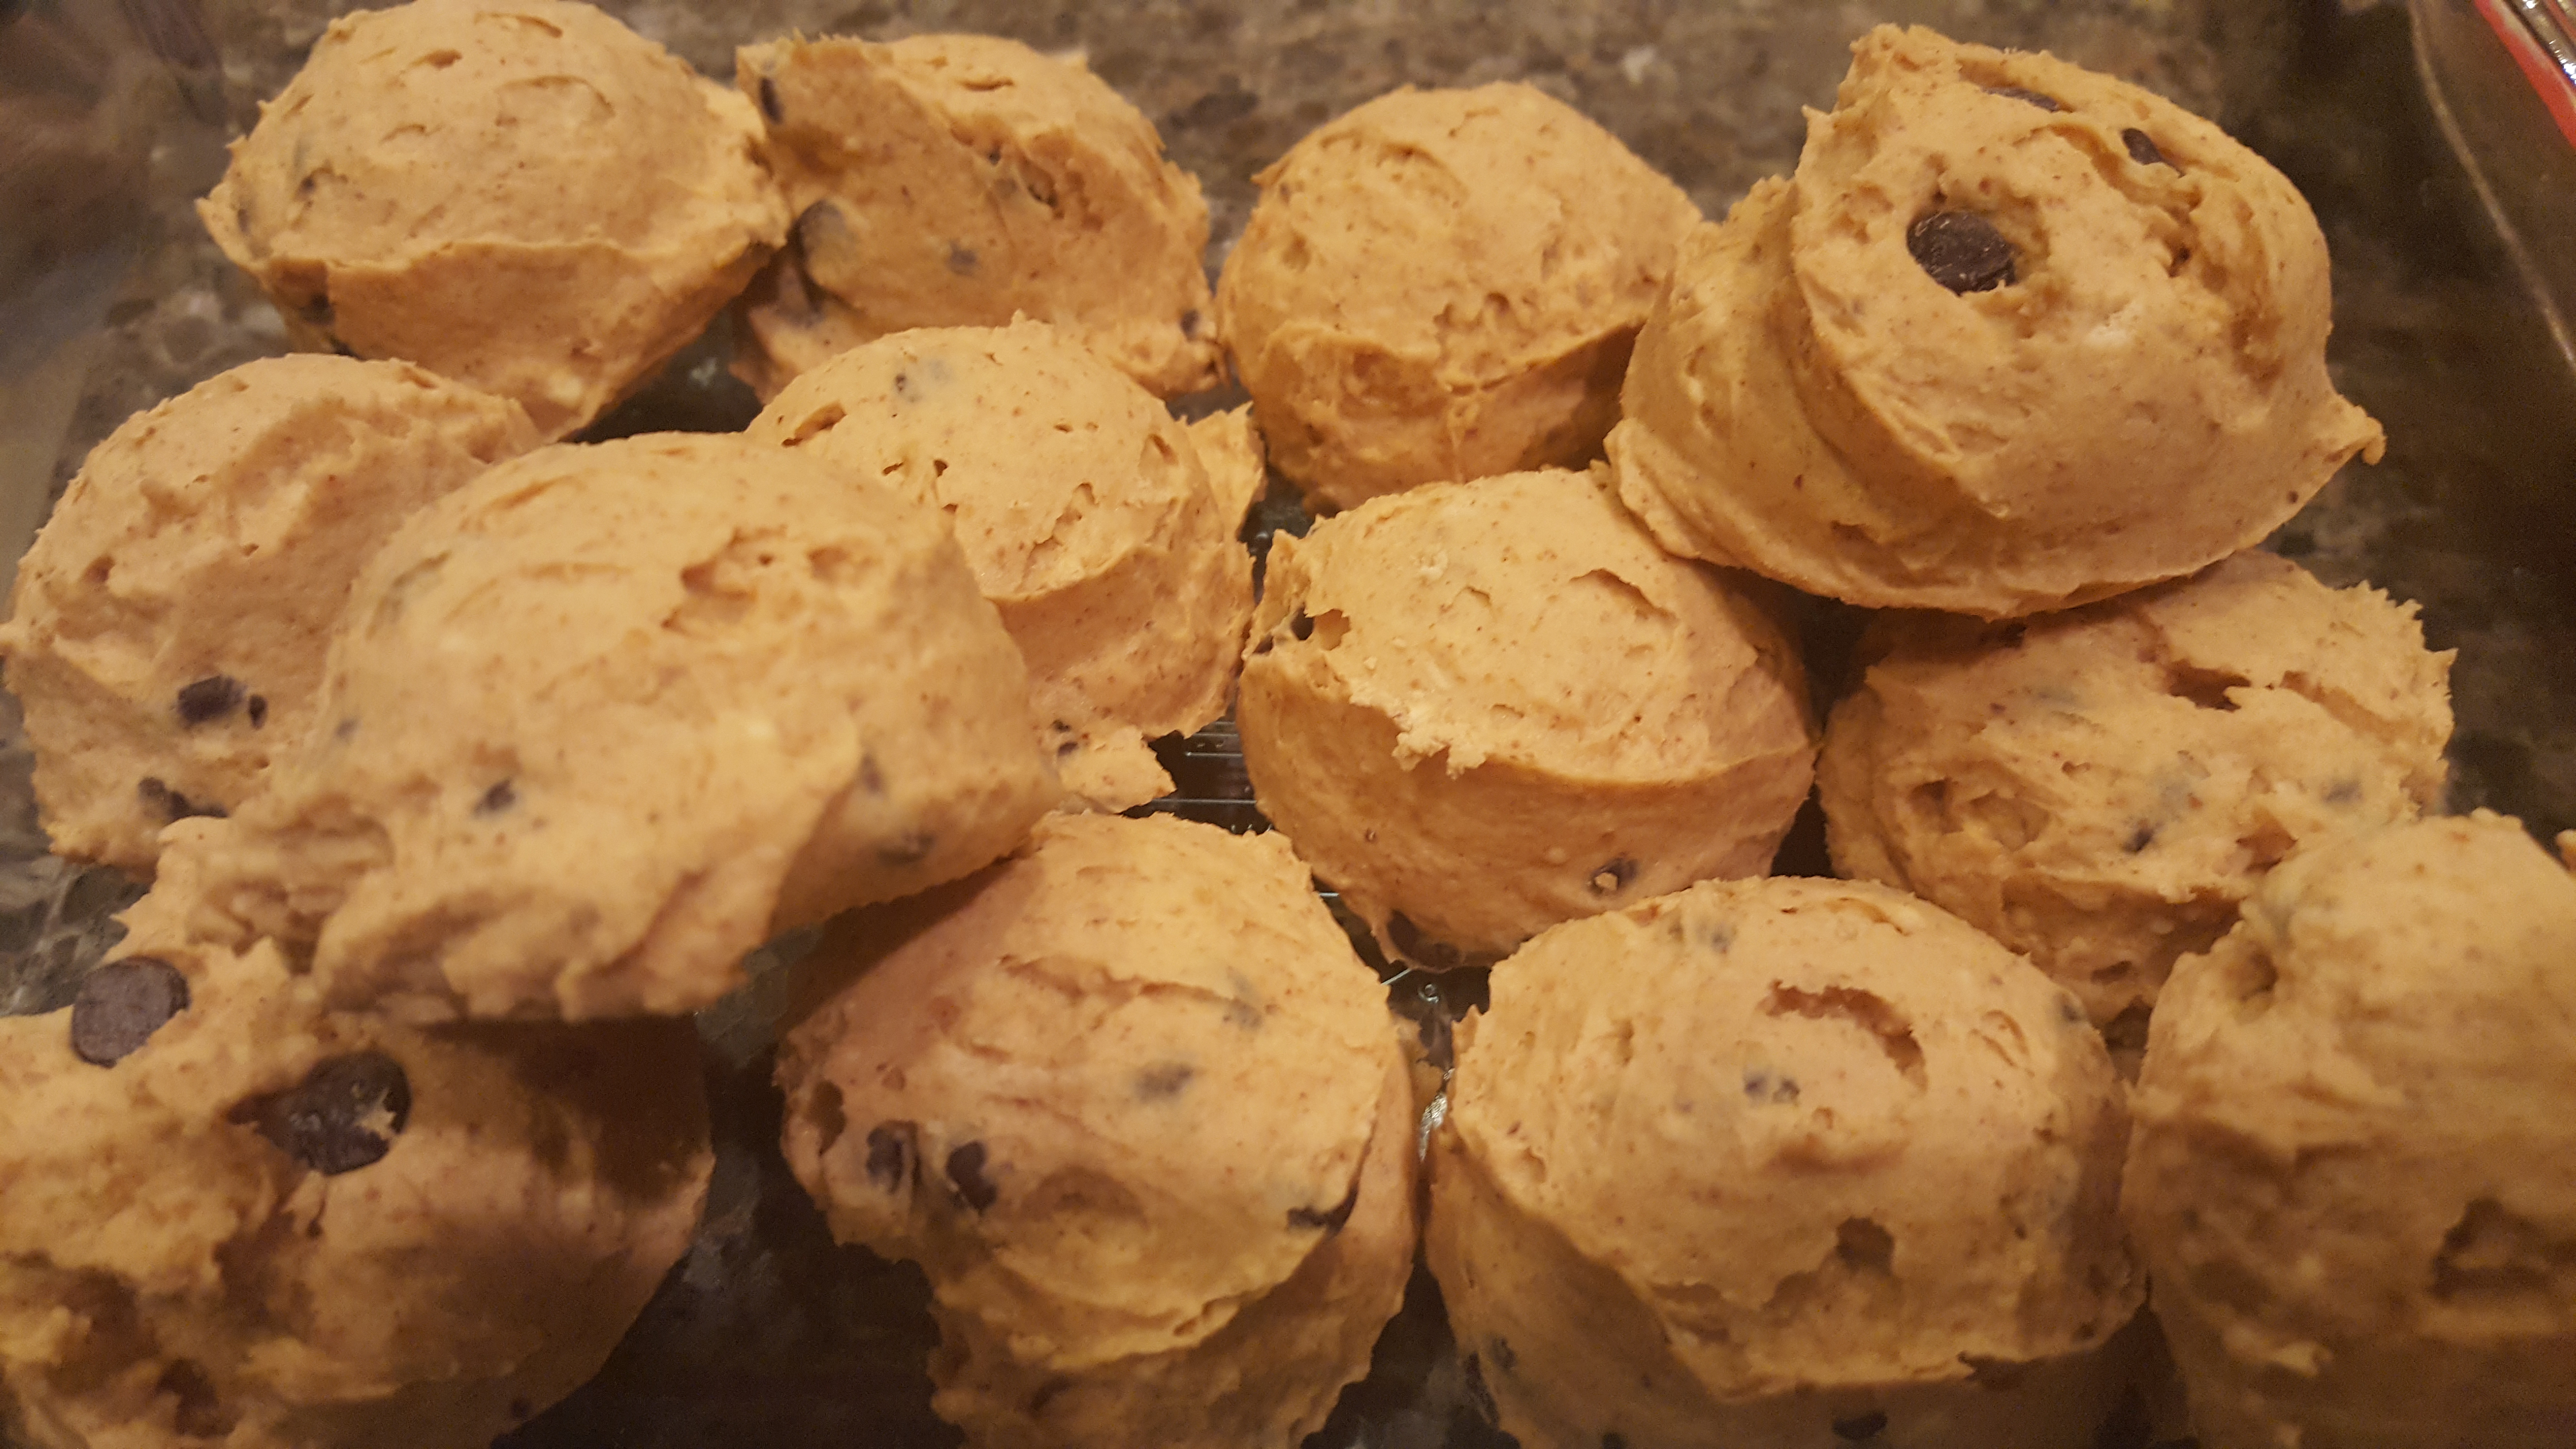 Chocolate Chip Cookie Dough Fat Bombs